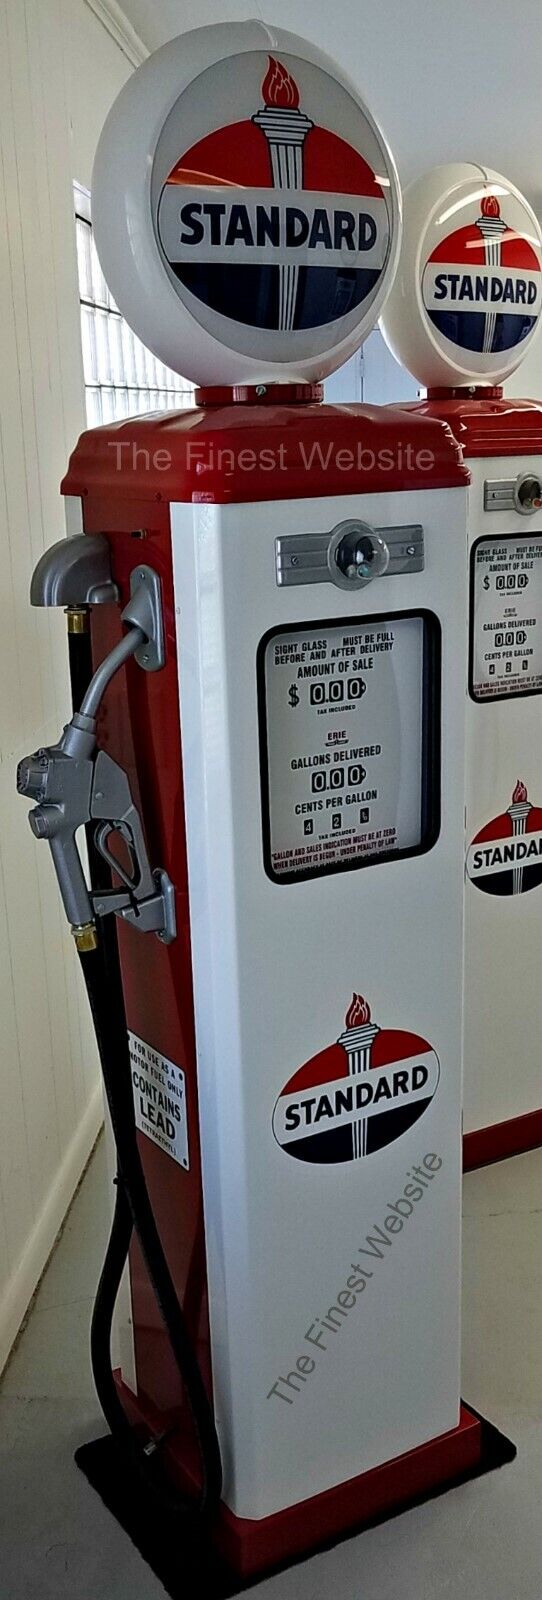 NEW STANDARD REPLICA GAS PUMP - ANTIQUE REPRODUCTION (WHITE & RED) - *